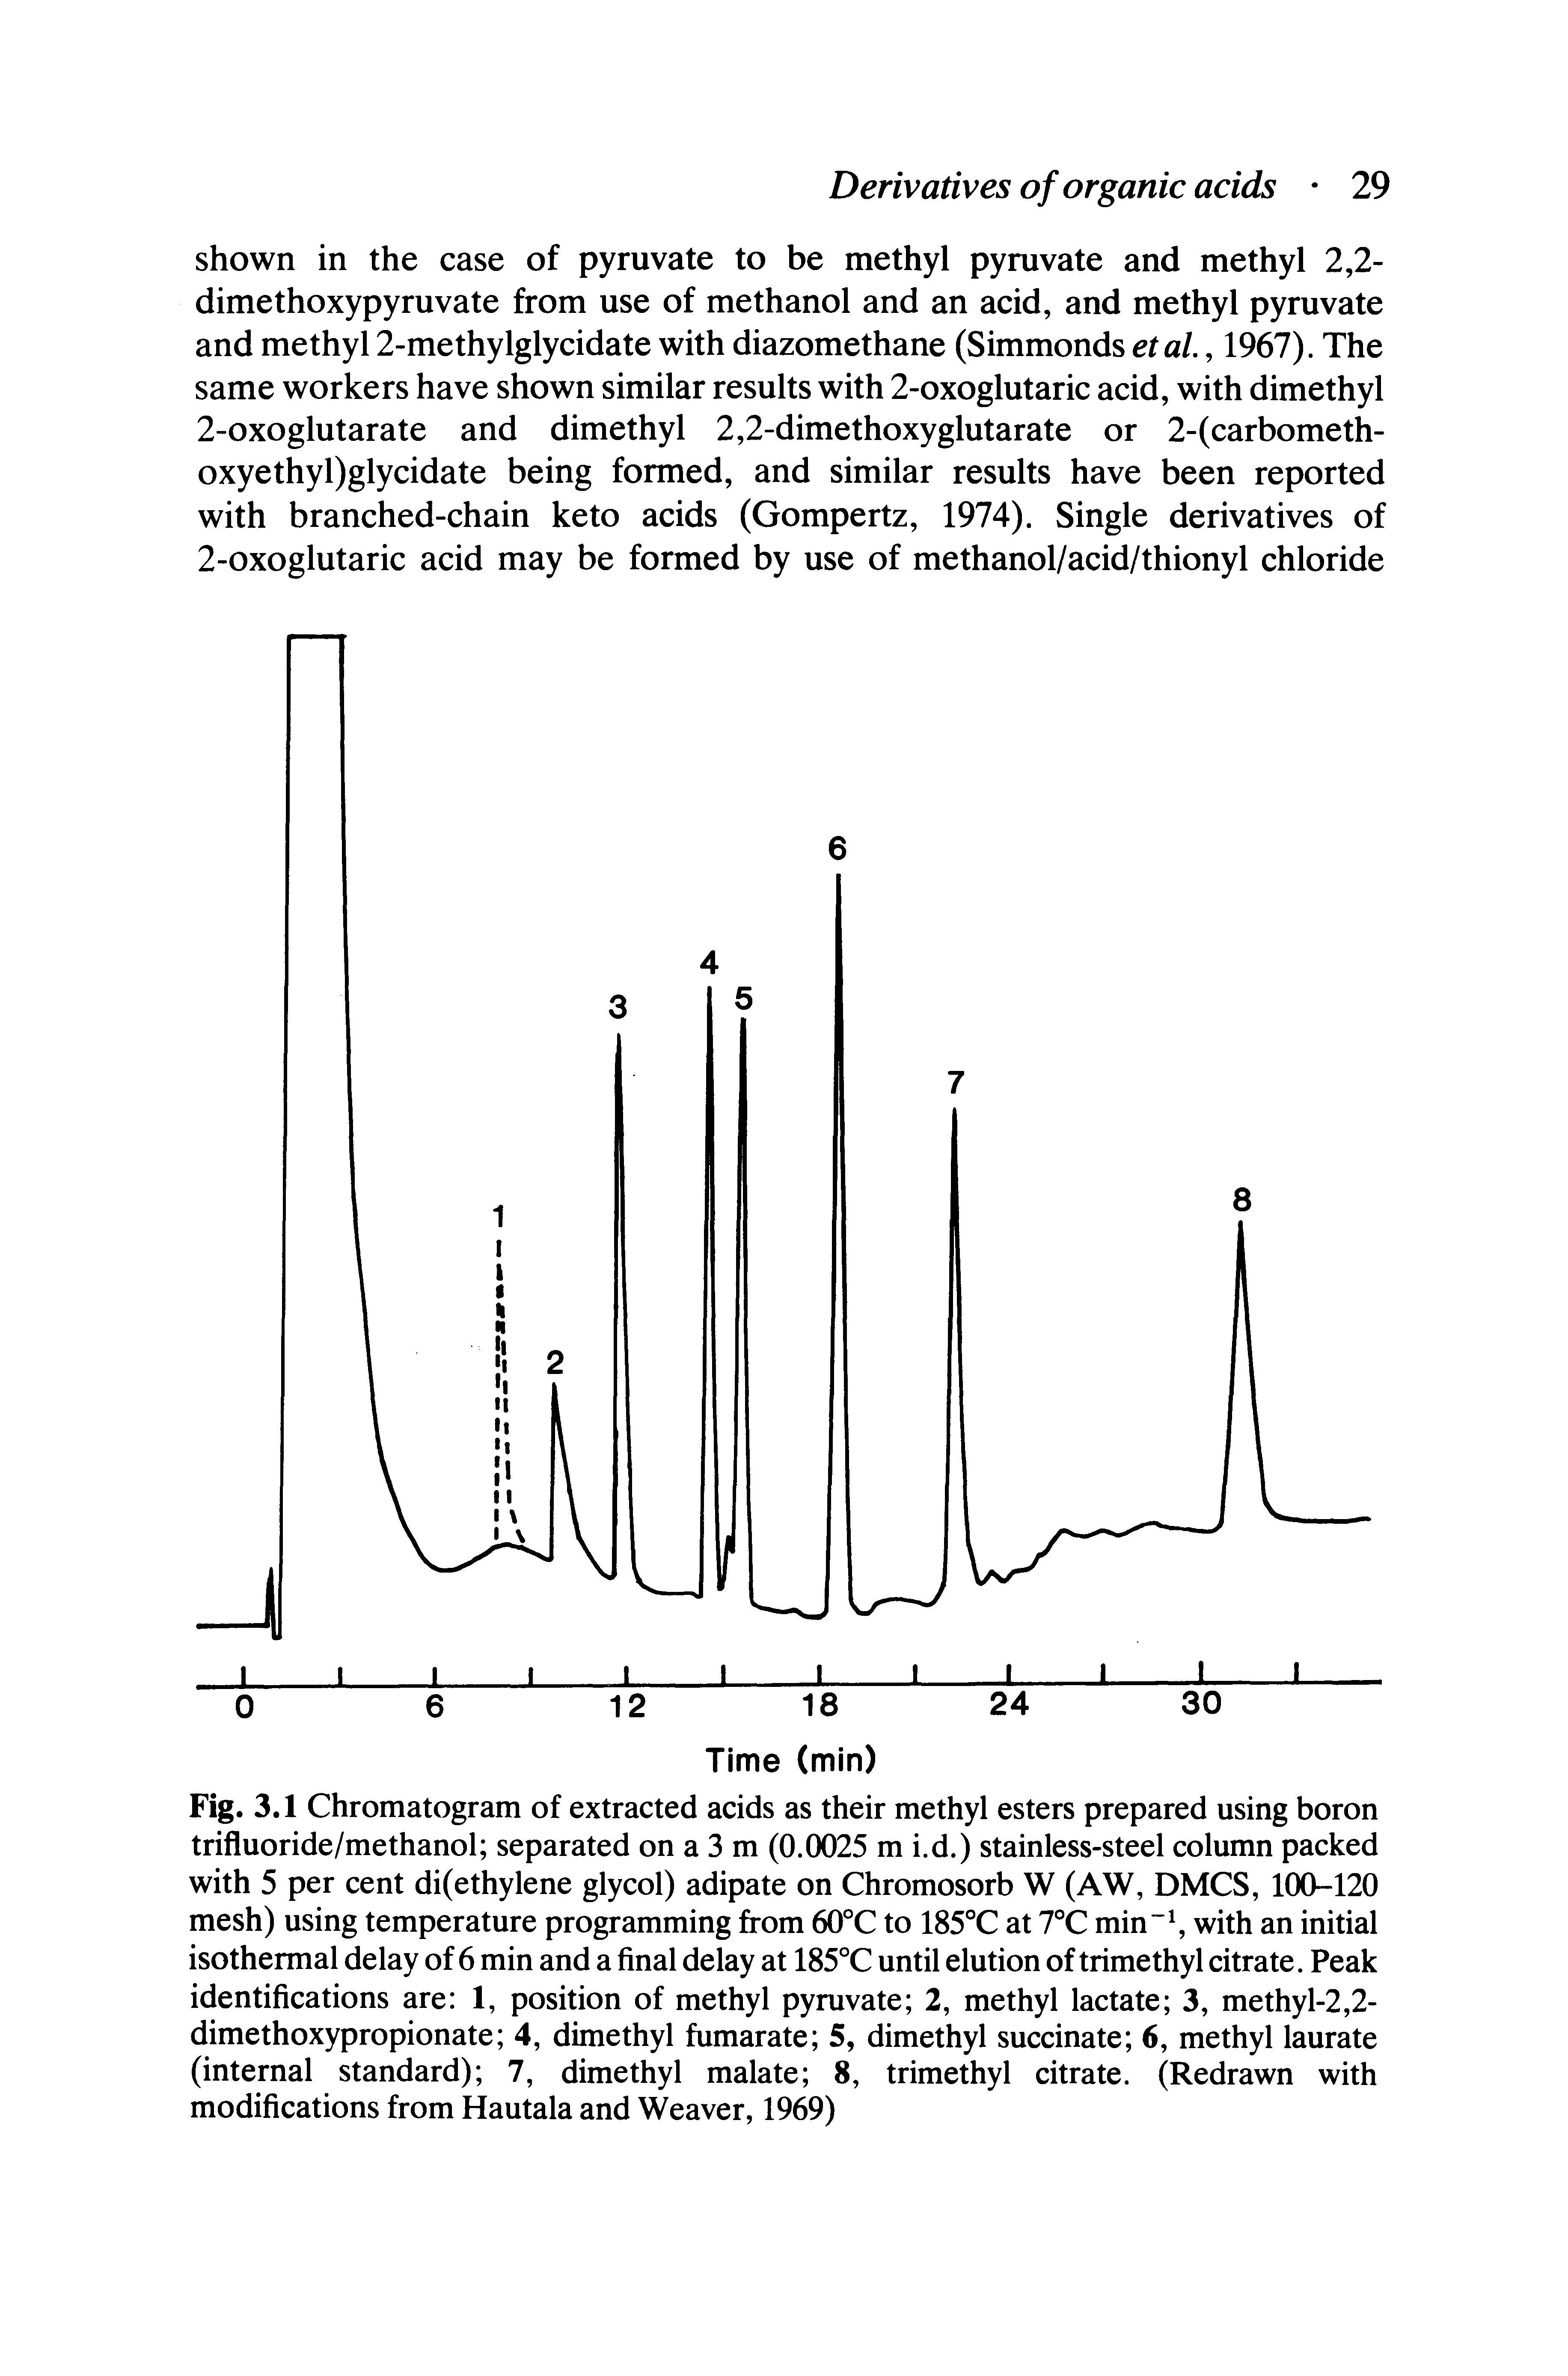 Fig. 3.1 Chromatogram of extracted acids as their methyl esters prepared using boron trifluoride/methanol separated on a 3 m (0.0025 m i.d.) stainless-steel column packed with 5 per cent di(ethylene glycol) adipate on Chromosorb W (AW, DMCS, 100-120 mesh) using temperature programming from 60°C to 185°C at 7°C min, with an initial isothermal delay of 6 min and a final delay at 185°C until elution of trimethyl citrate. Peak identifications are 1, position of methyl pyruvate 2, methyl lactate 3, methyl-2,2-dimethoxypropionate 4, dimethyl fumarate 5, dimethyl succinate 6, methyl laurate (internal standard) 7, dimethyl malate 8, trimethyl citrate. (Redrawn with modifications from Hautala and Weaver, 1969)...